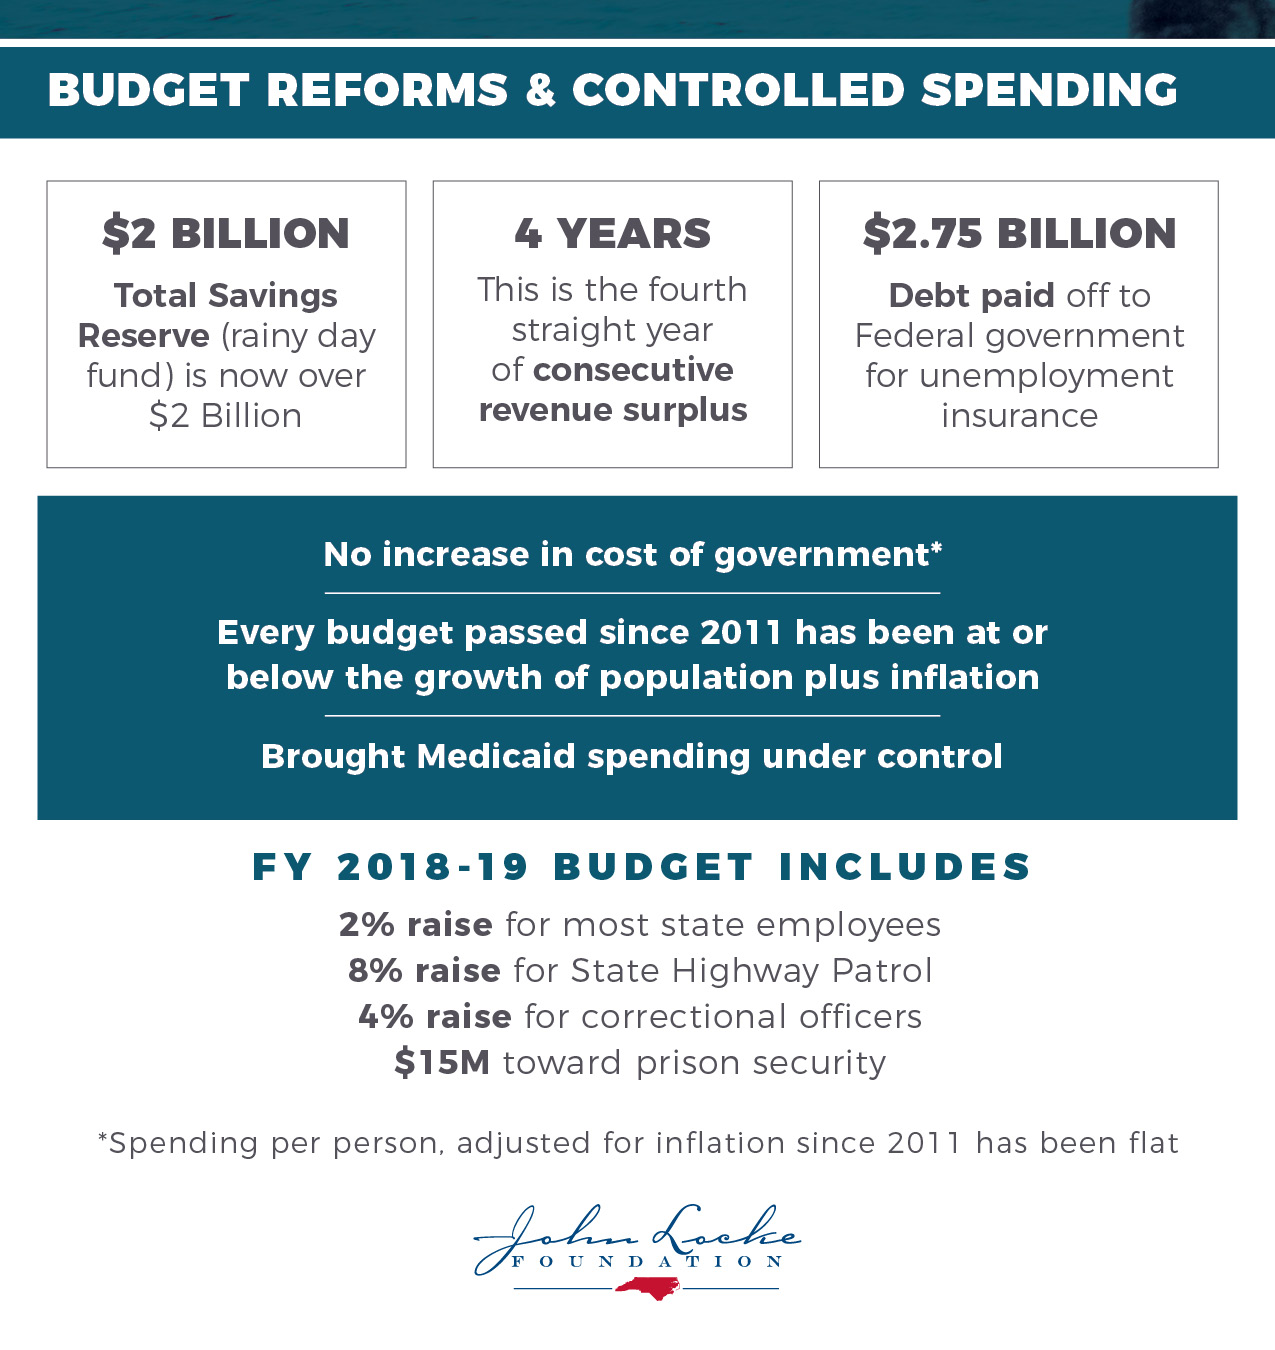 NC Fact Sheet Budget Reforms and Controlled Spending